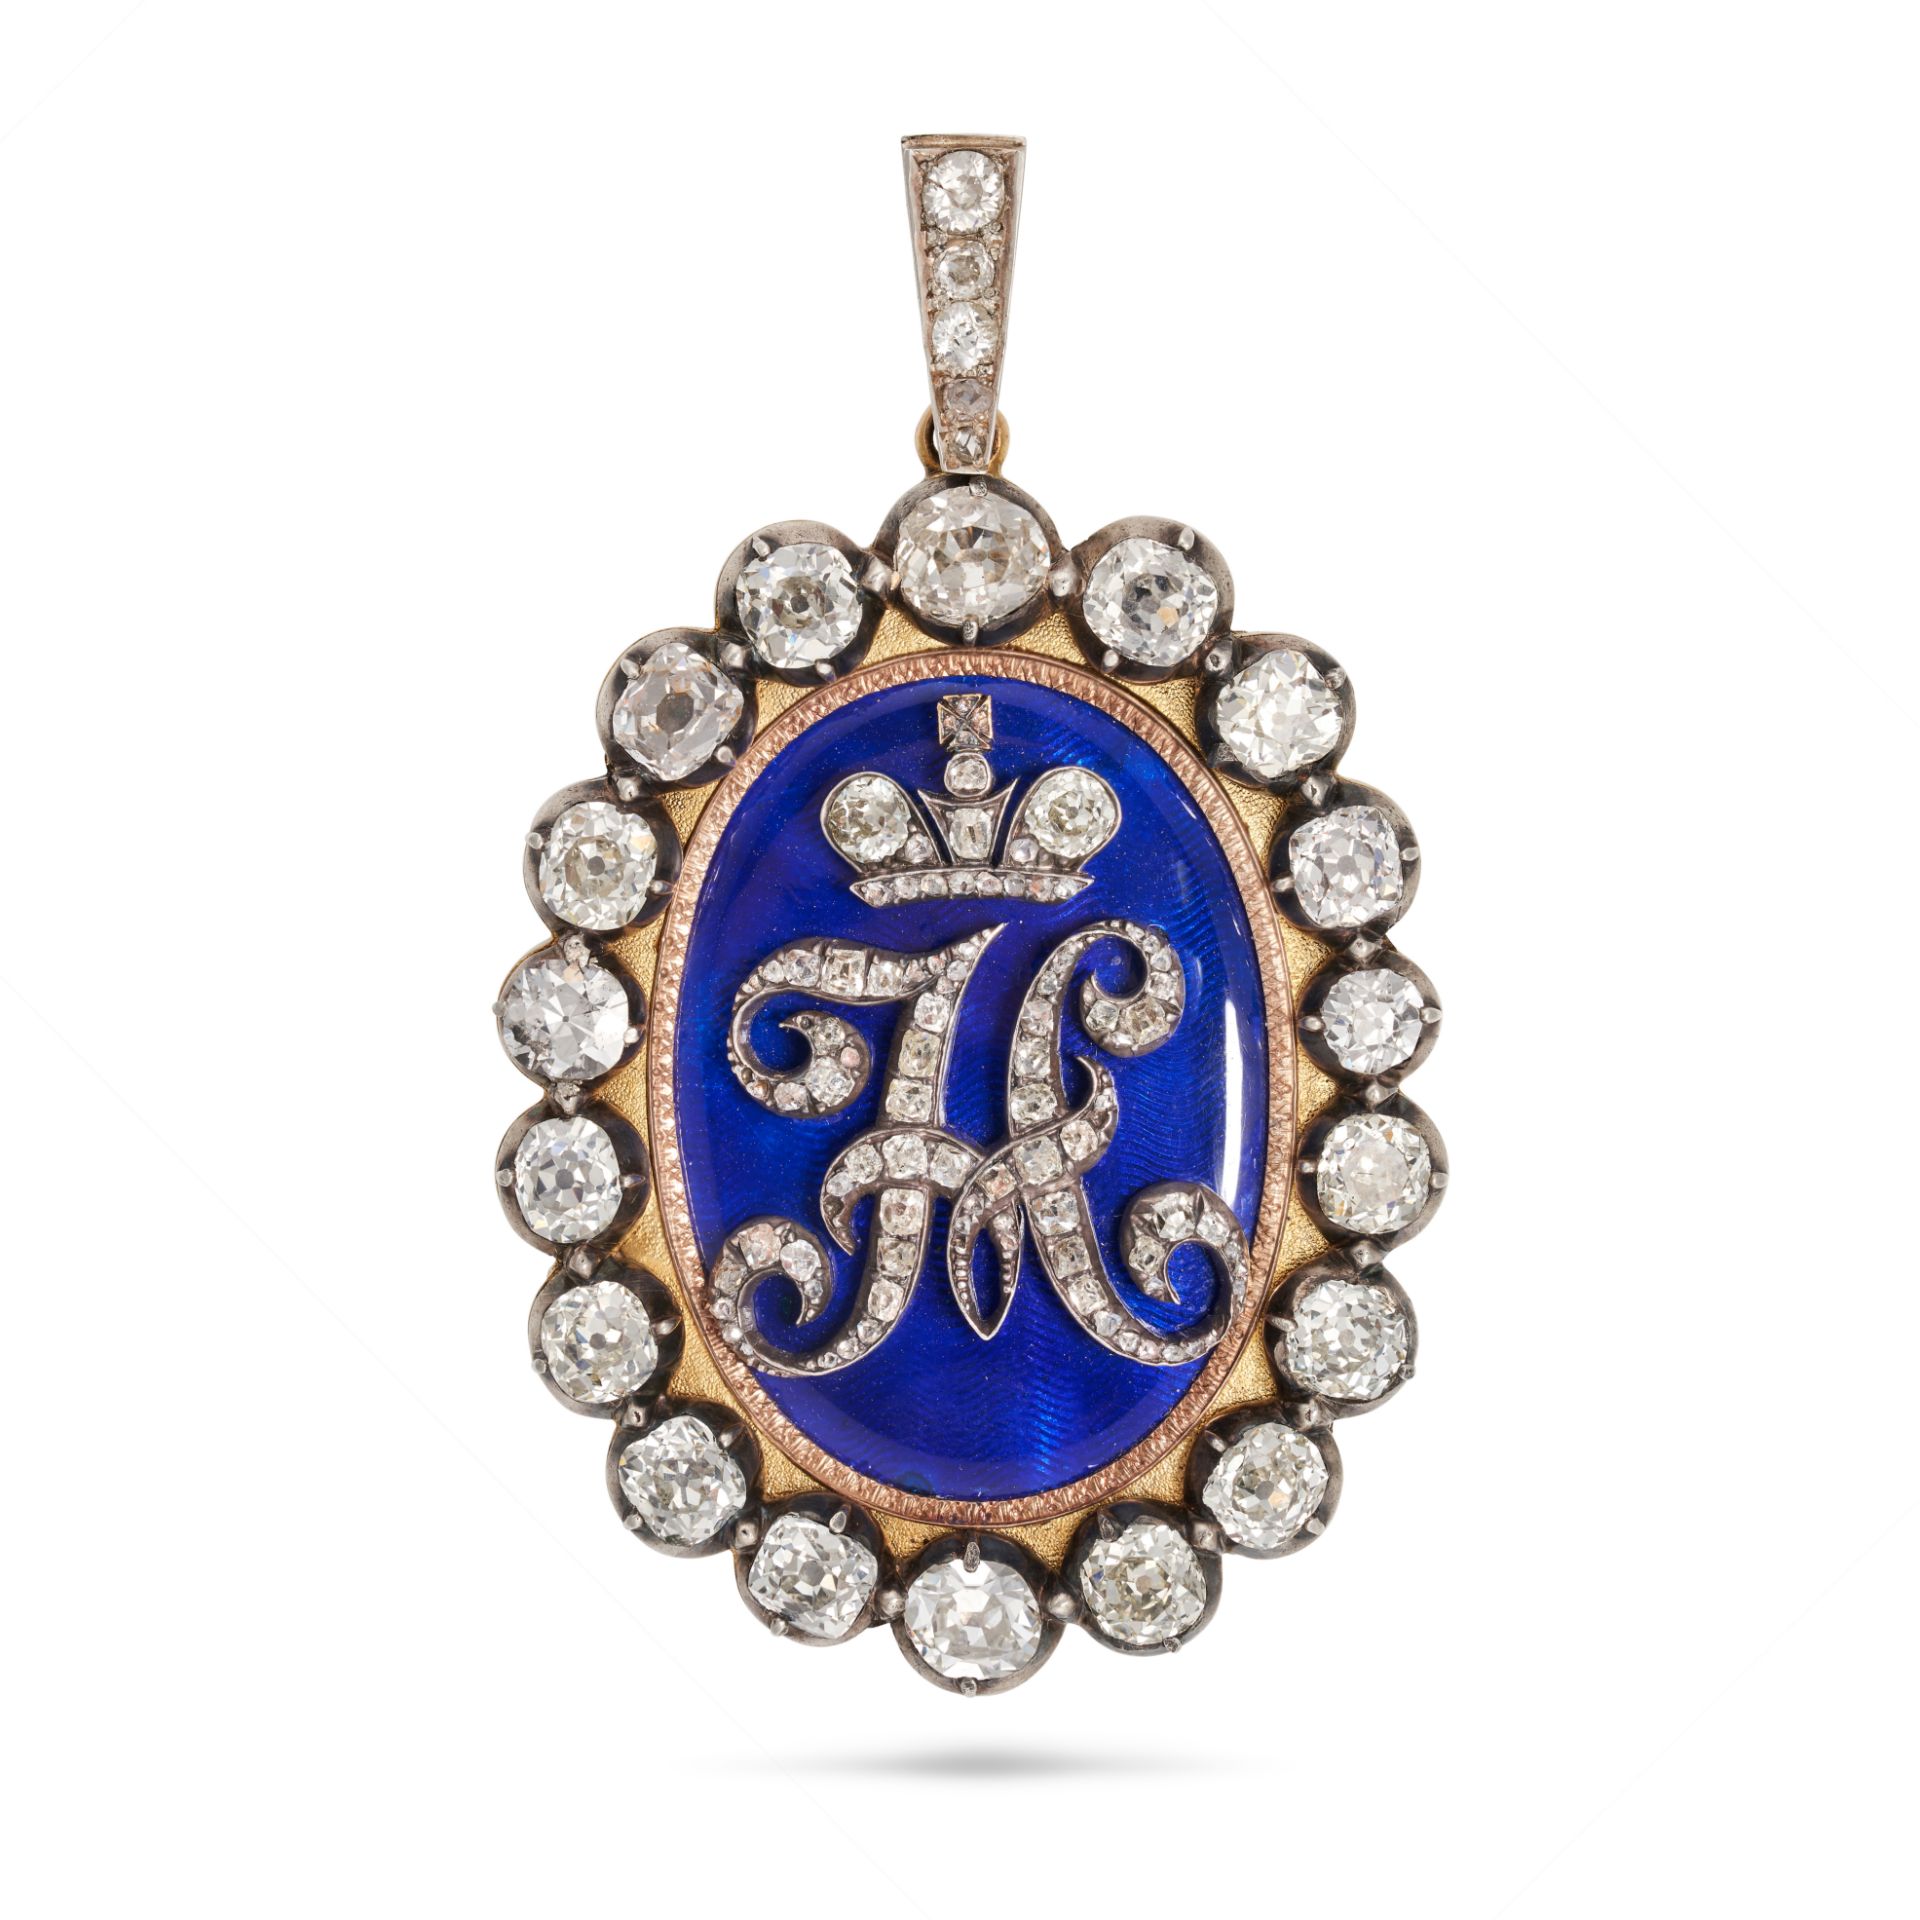 AN IMPORTANT ANTIQUE IMPERIAL RUSSIAN DIAMOND AND ENAMEL PRESENTATION PENDANT, 19TH CENTURY in ye...